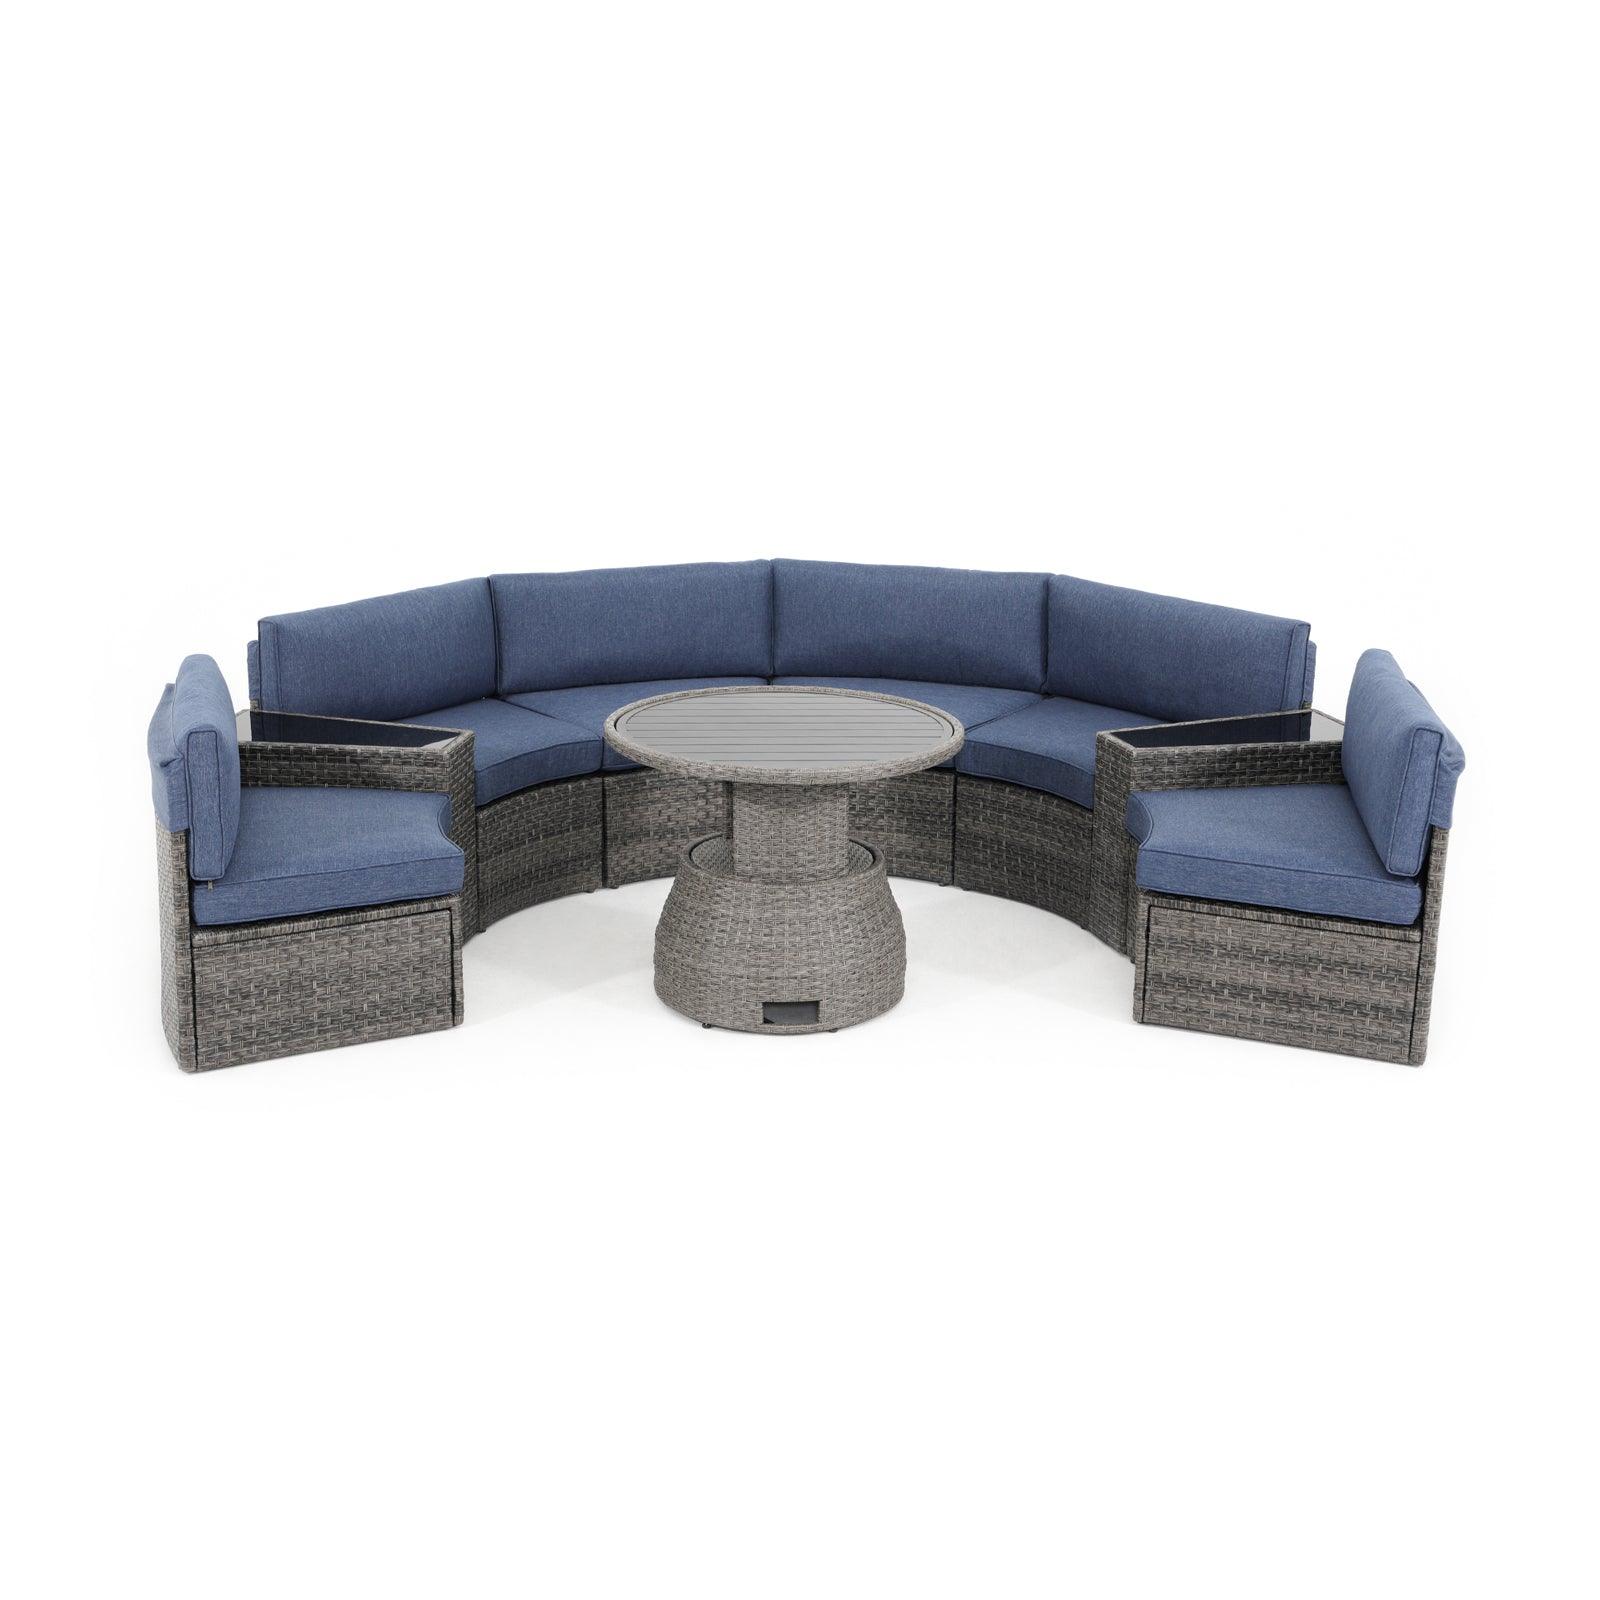 Boboli Modern Wicker Outdoor Furniture, curved sectional sofa with Lift-top Round Table - Jardina Furniture